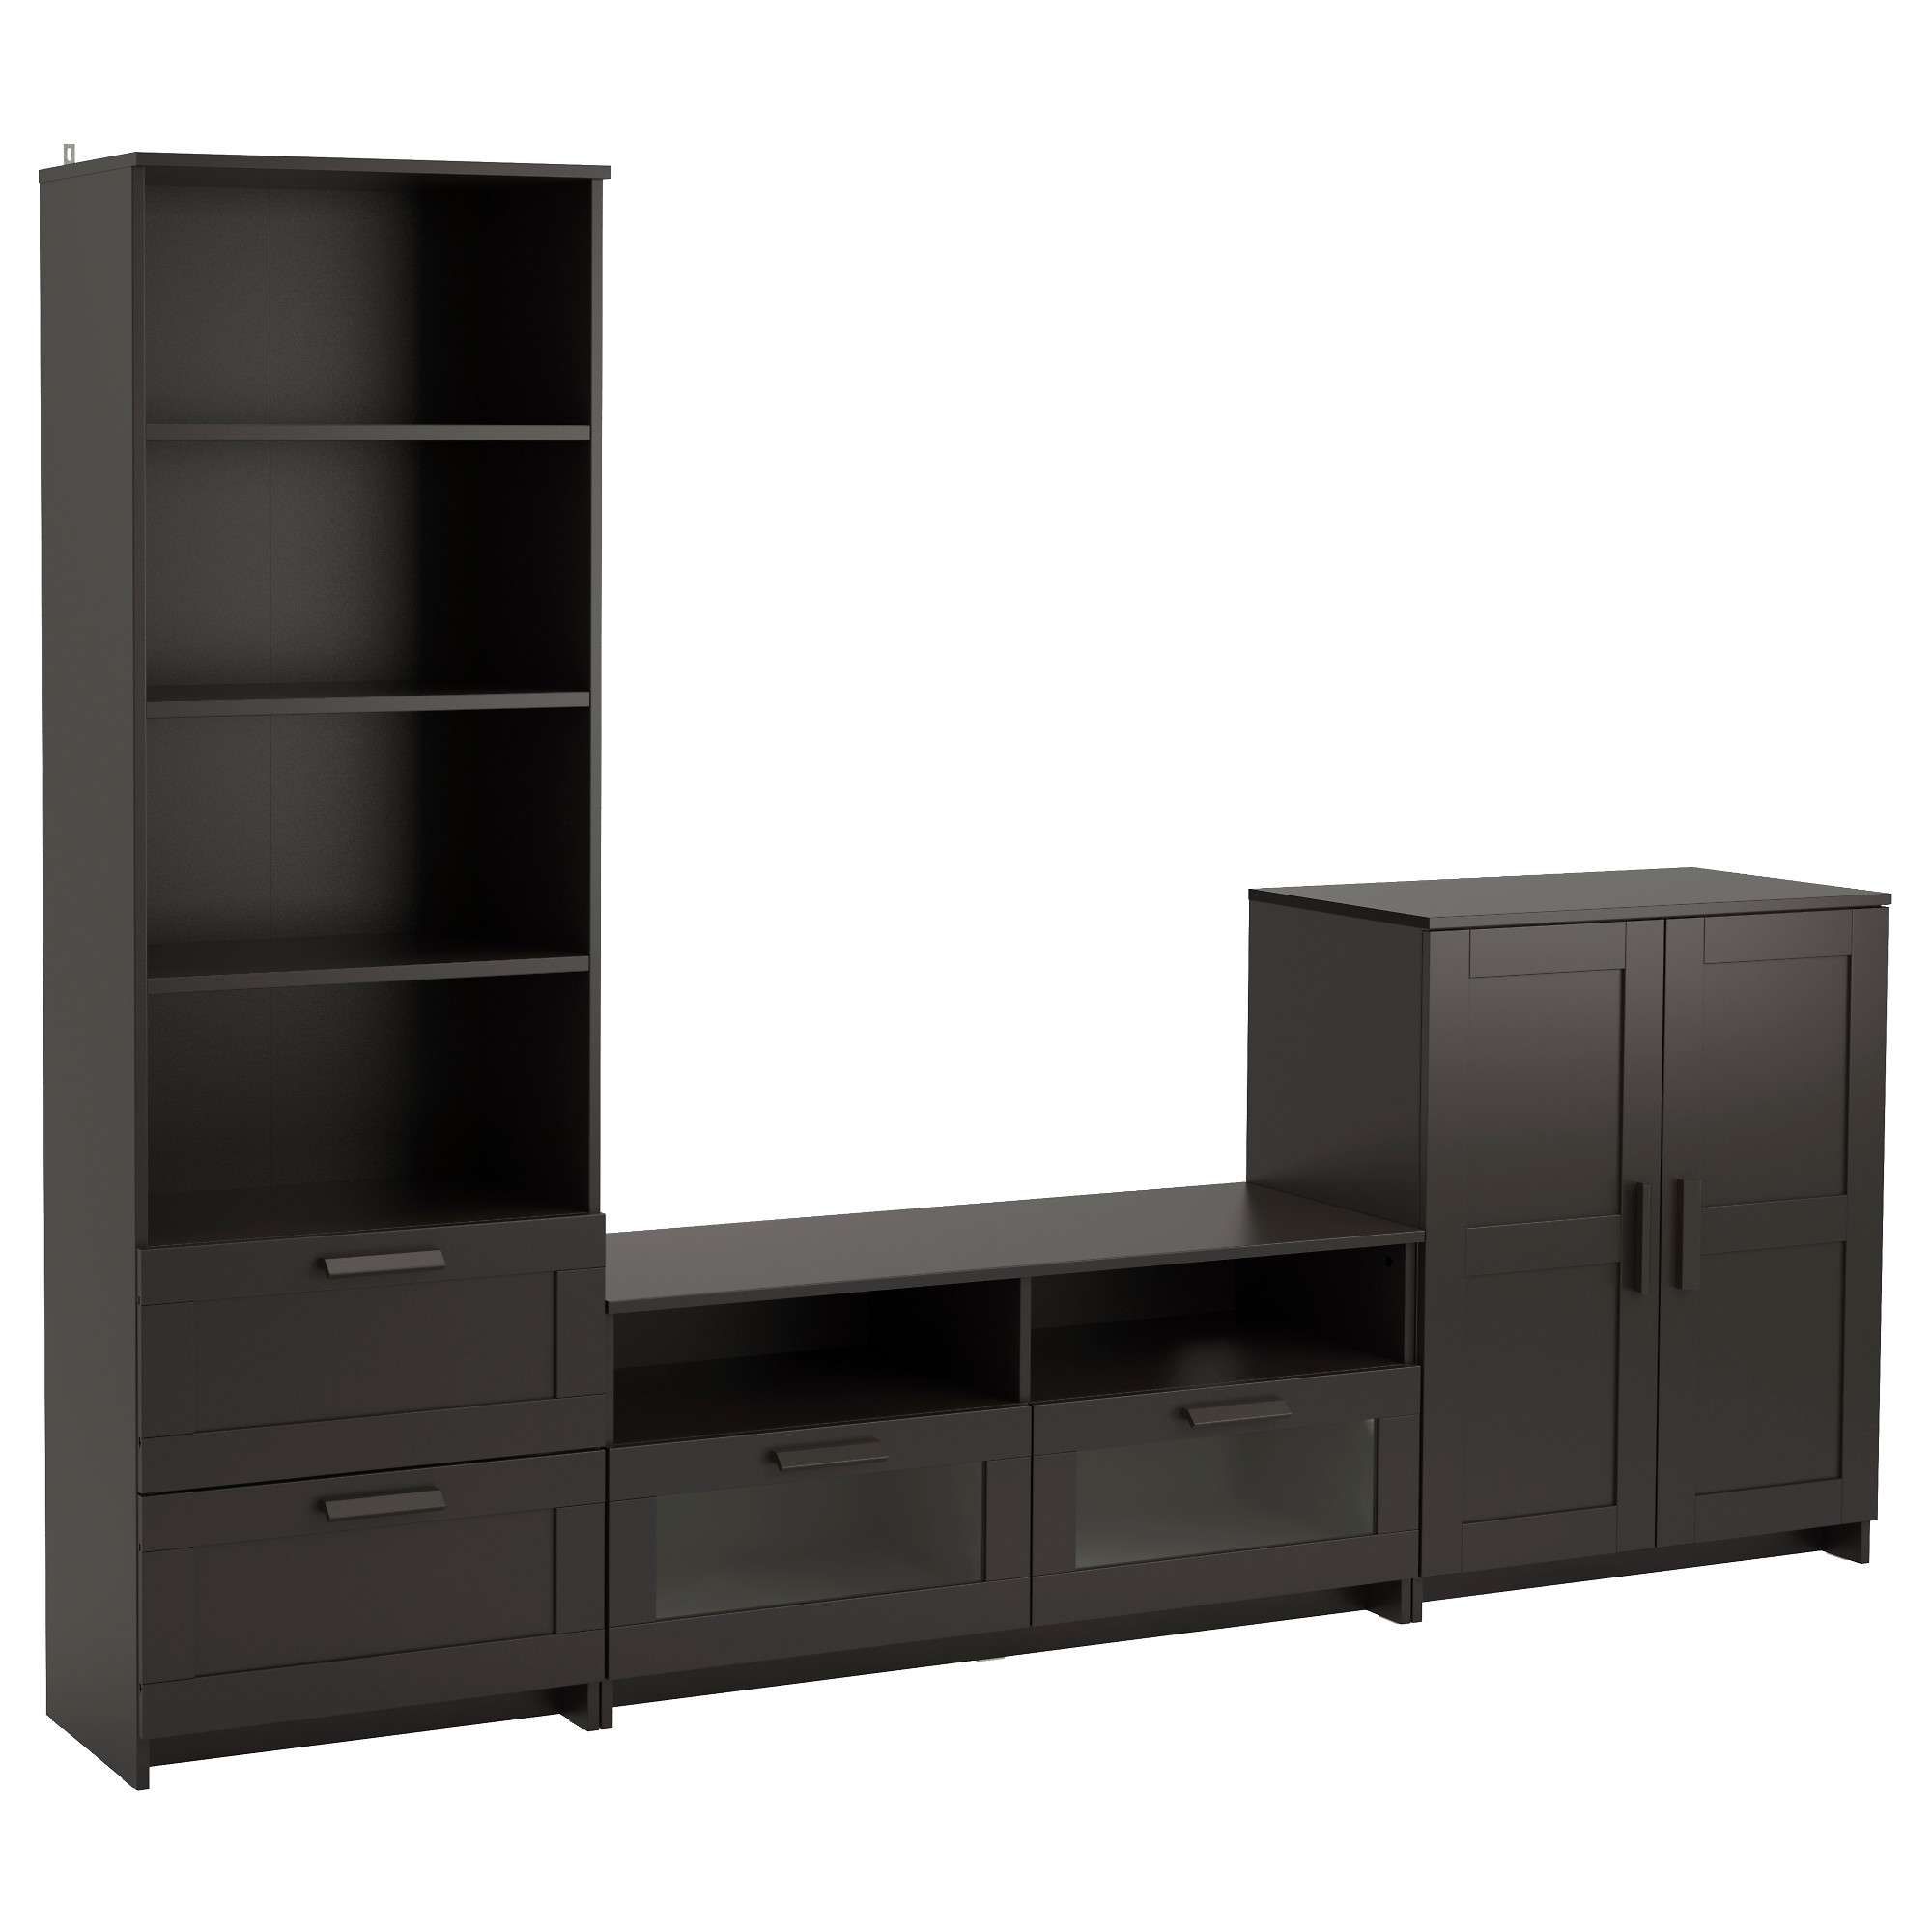 Furniture Home: Tv Stand Bookcase Combo Stands With Glass Doors Intended For Tv Stands Bookshelf Combo (View 6 of 15)